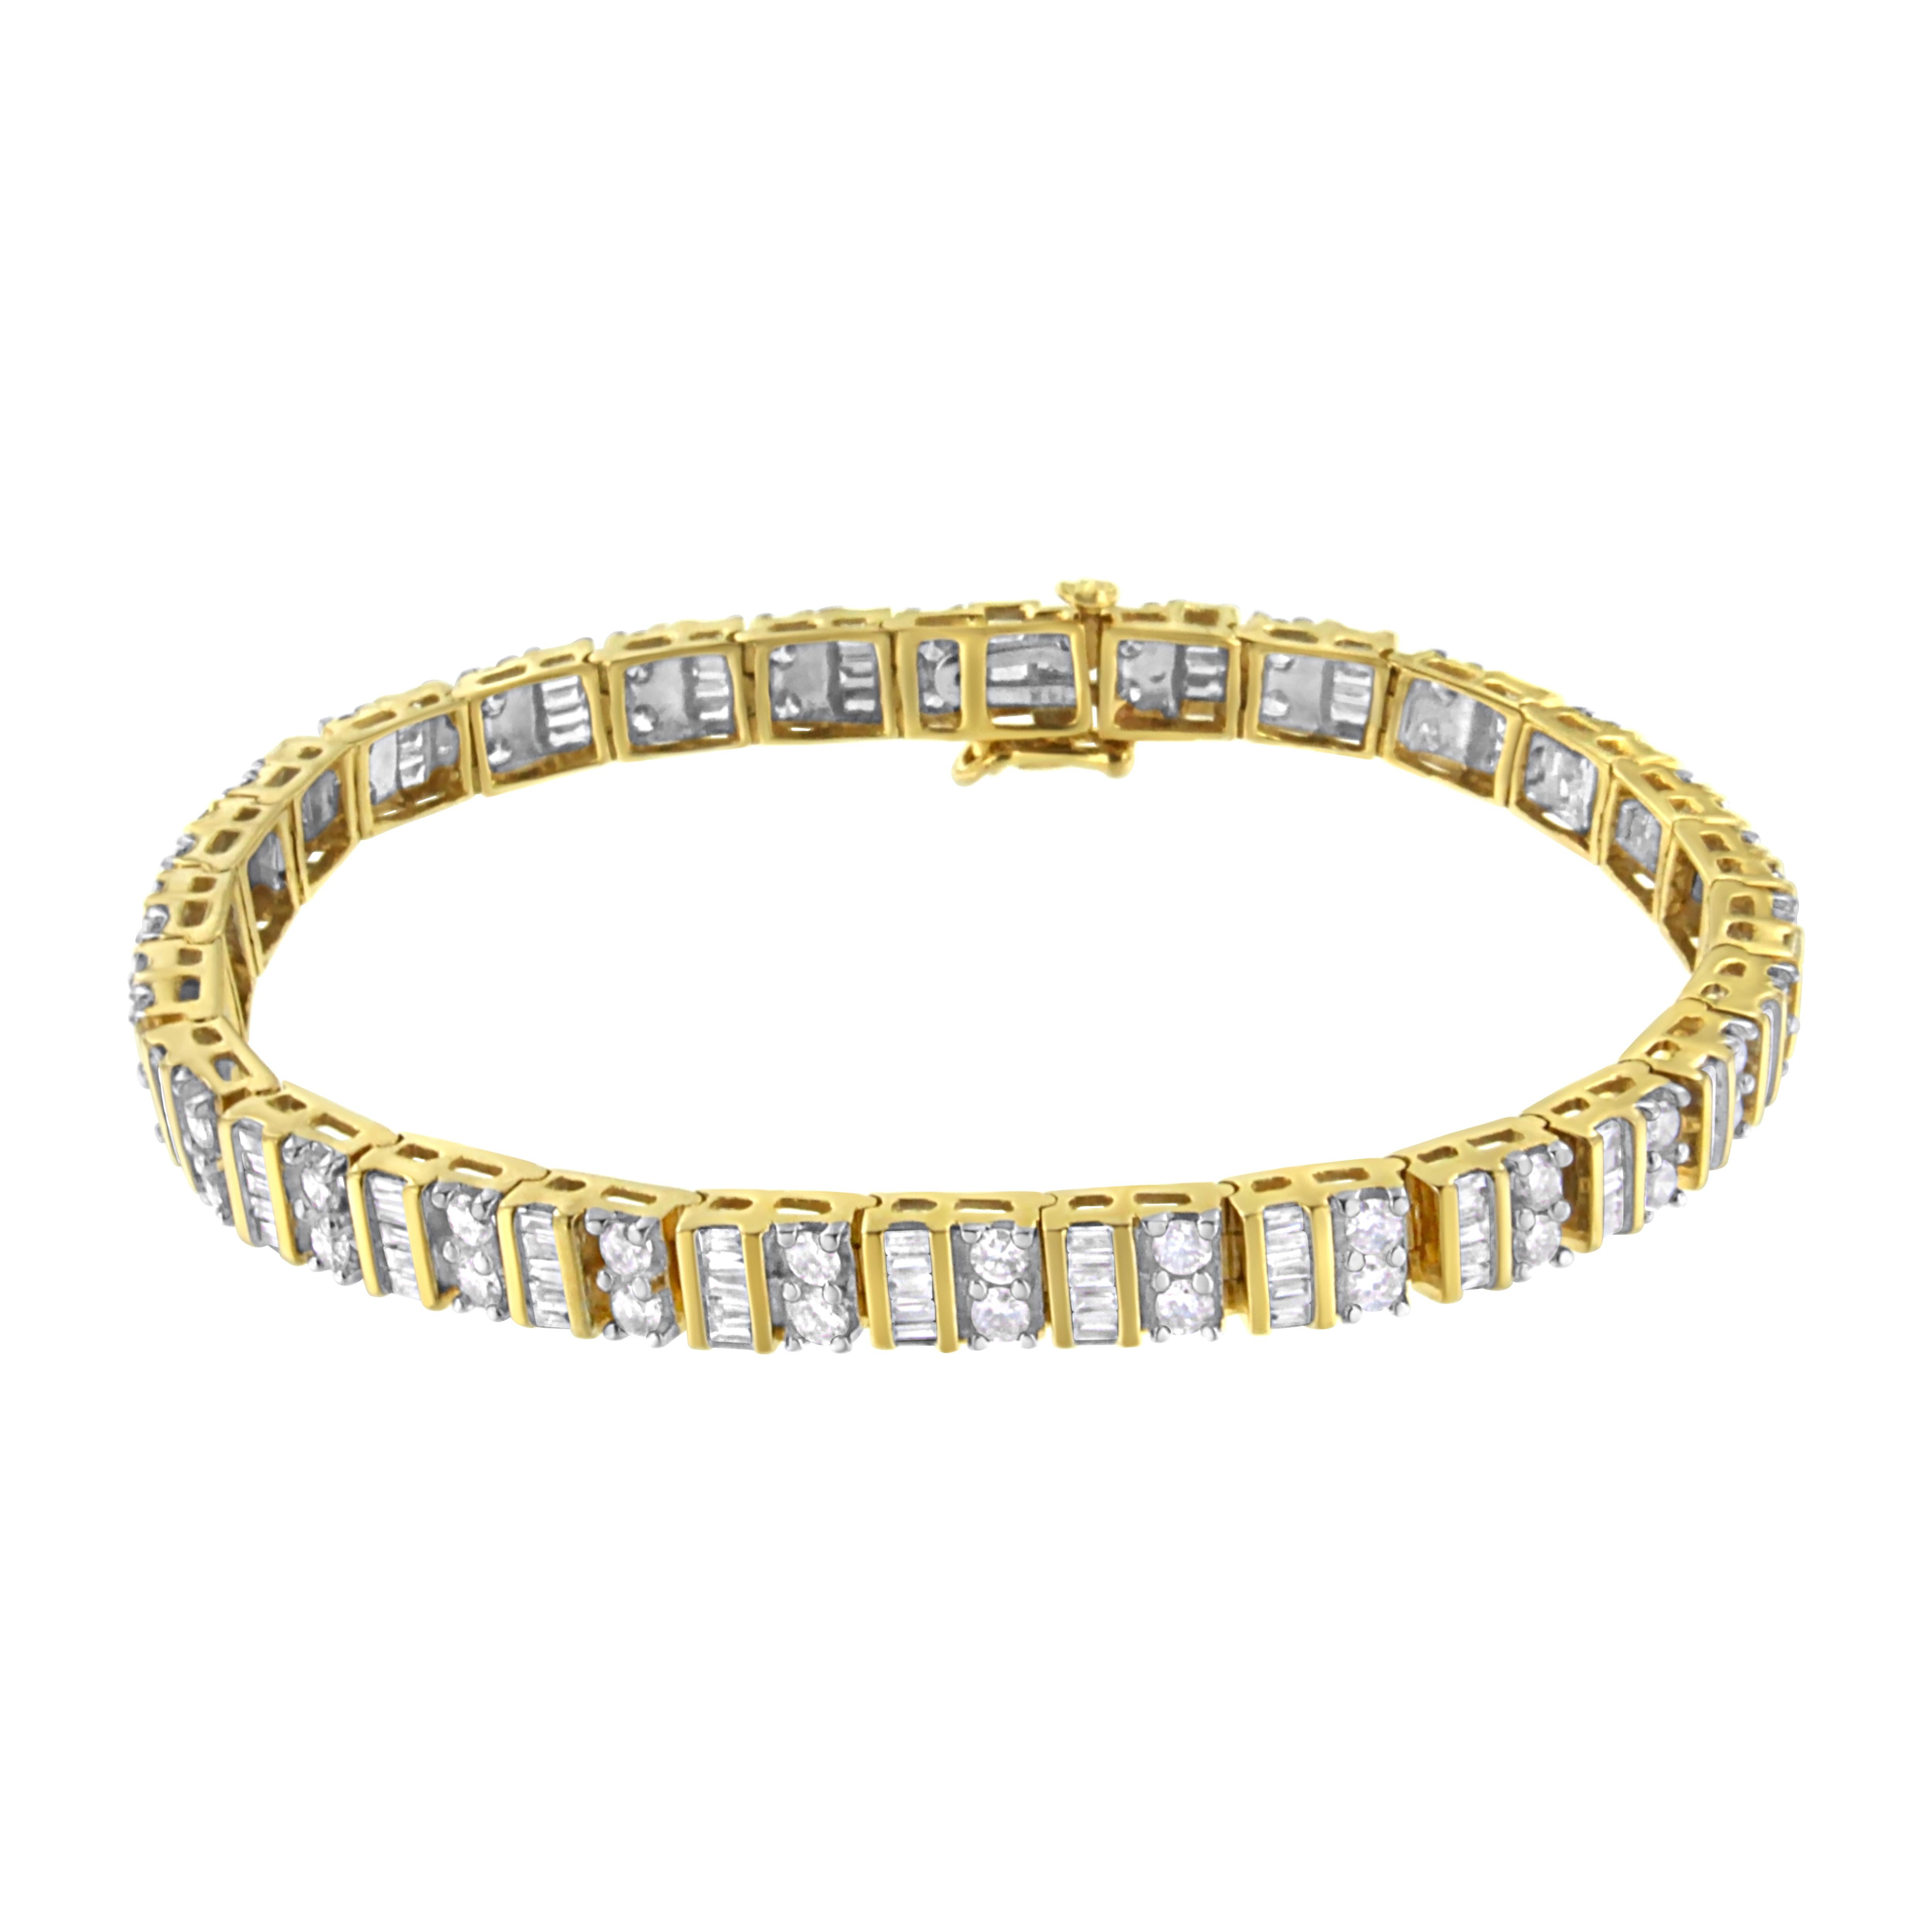 A must have for any serious jewelry collection, this stunning 14K yellow gold tennis bracelet boasts an impressive 4.0 carat total weight of diamonds with a whopping 224 individual stones. The bracelet features alternating columns of prong set